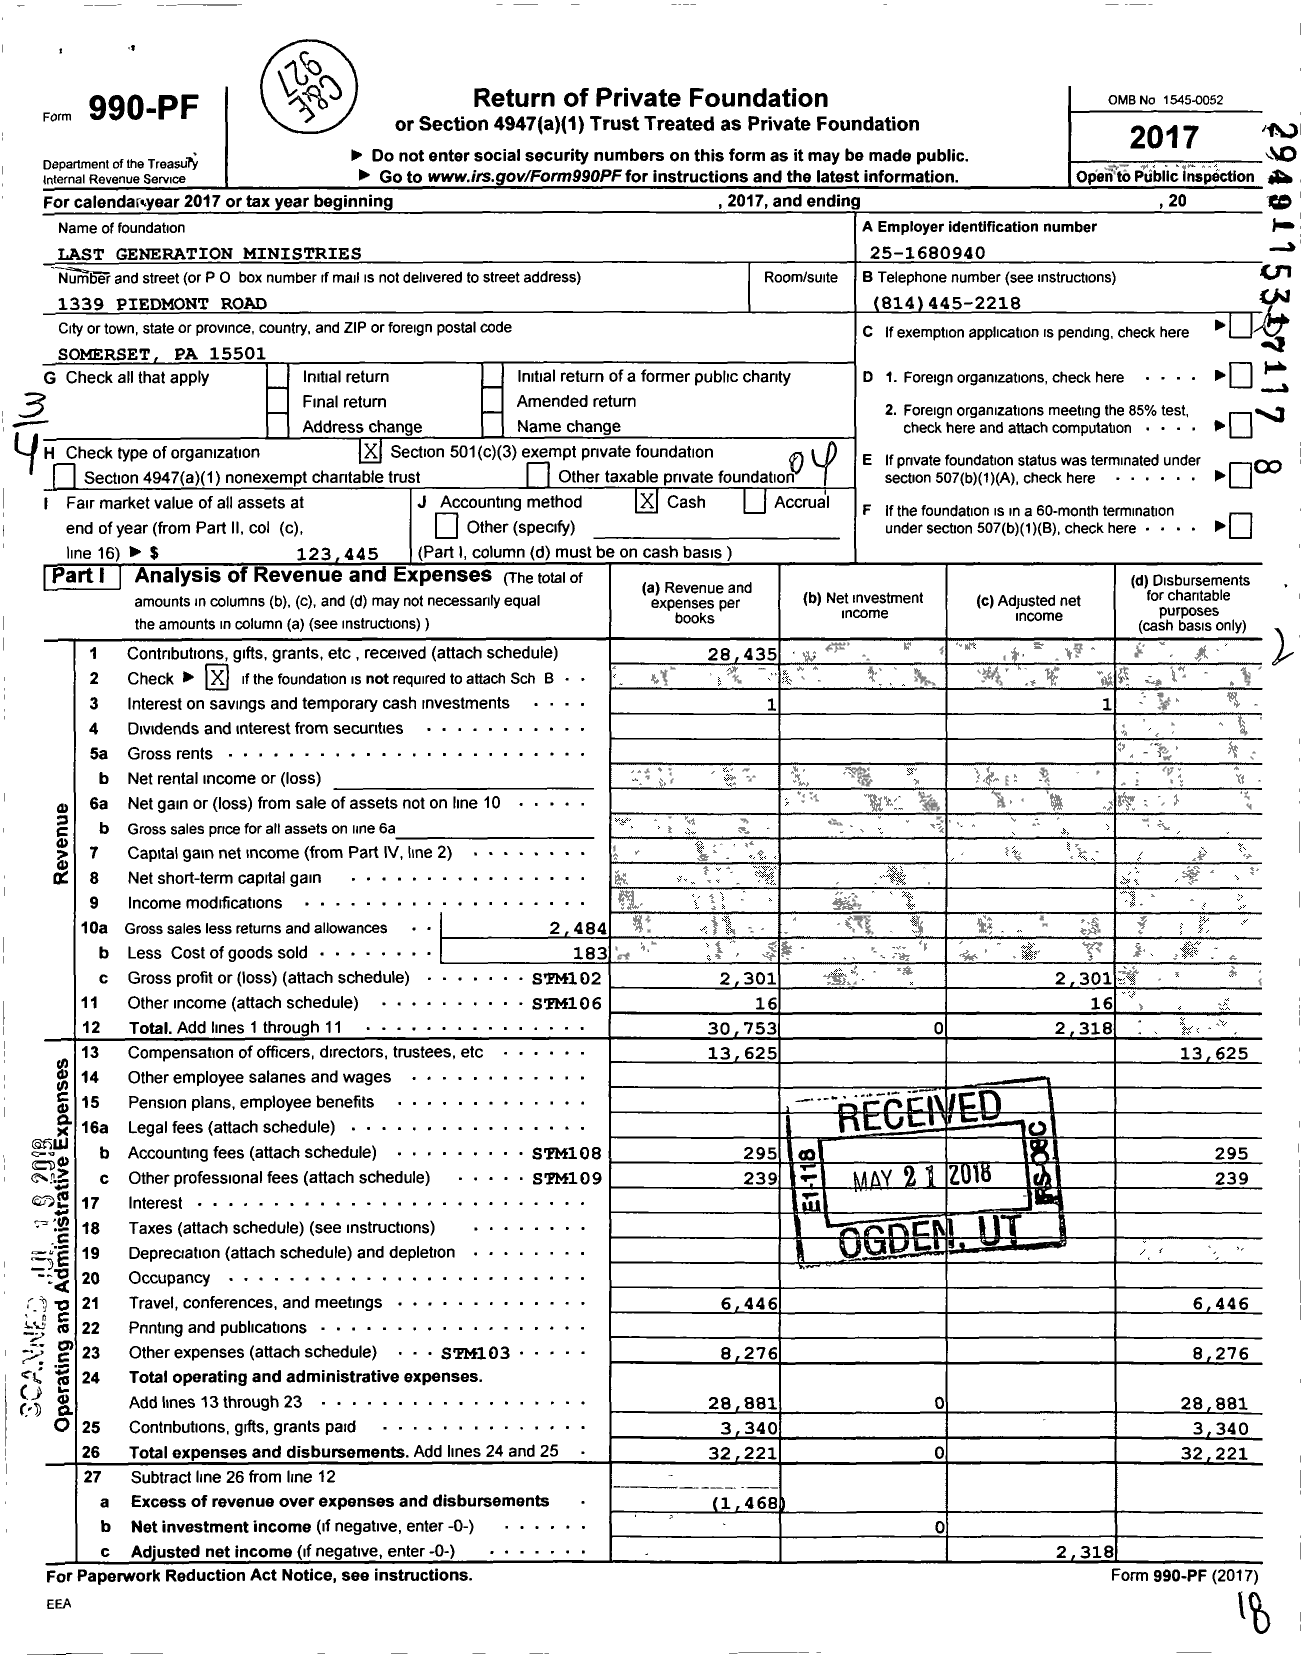 Image of first page of 2017 Form 990PF for Last Generation Ministries